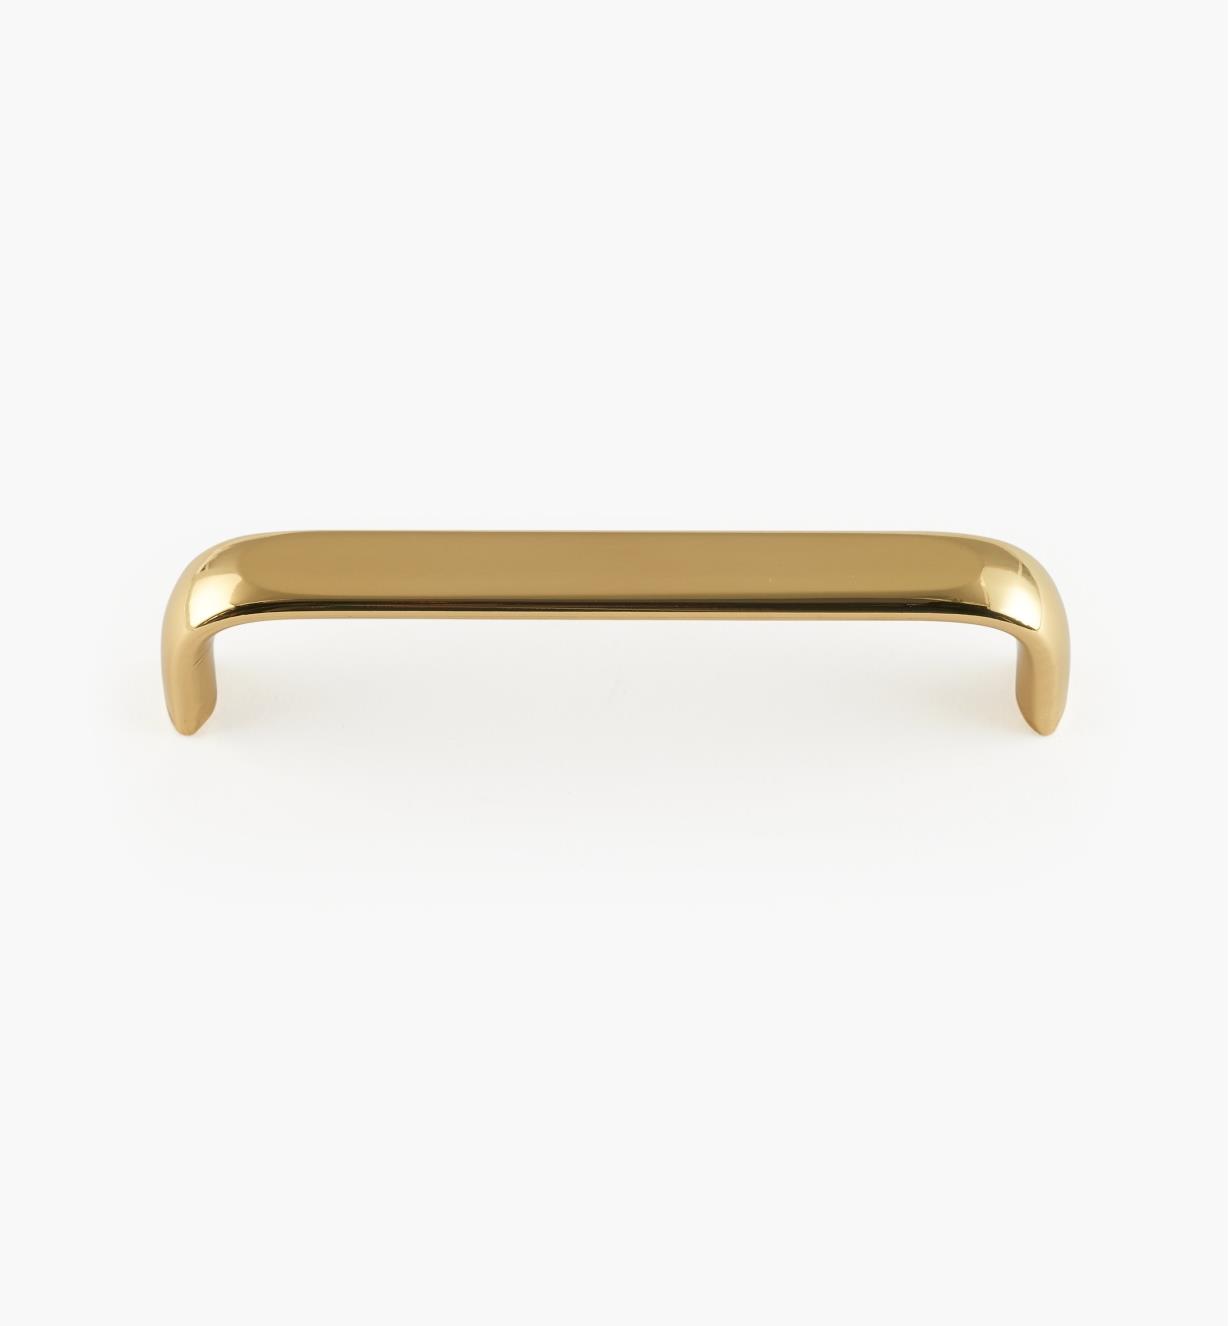 00W4211 - 96mm Polished Brass Broad Oval Pull